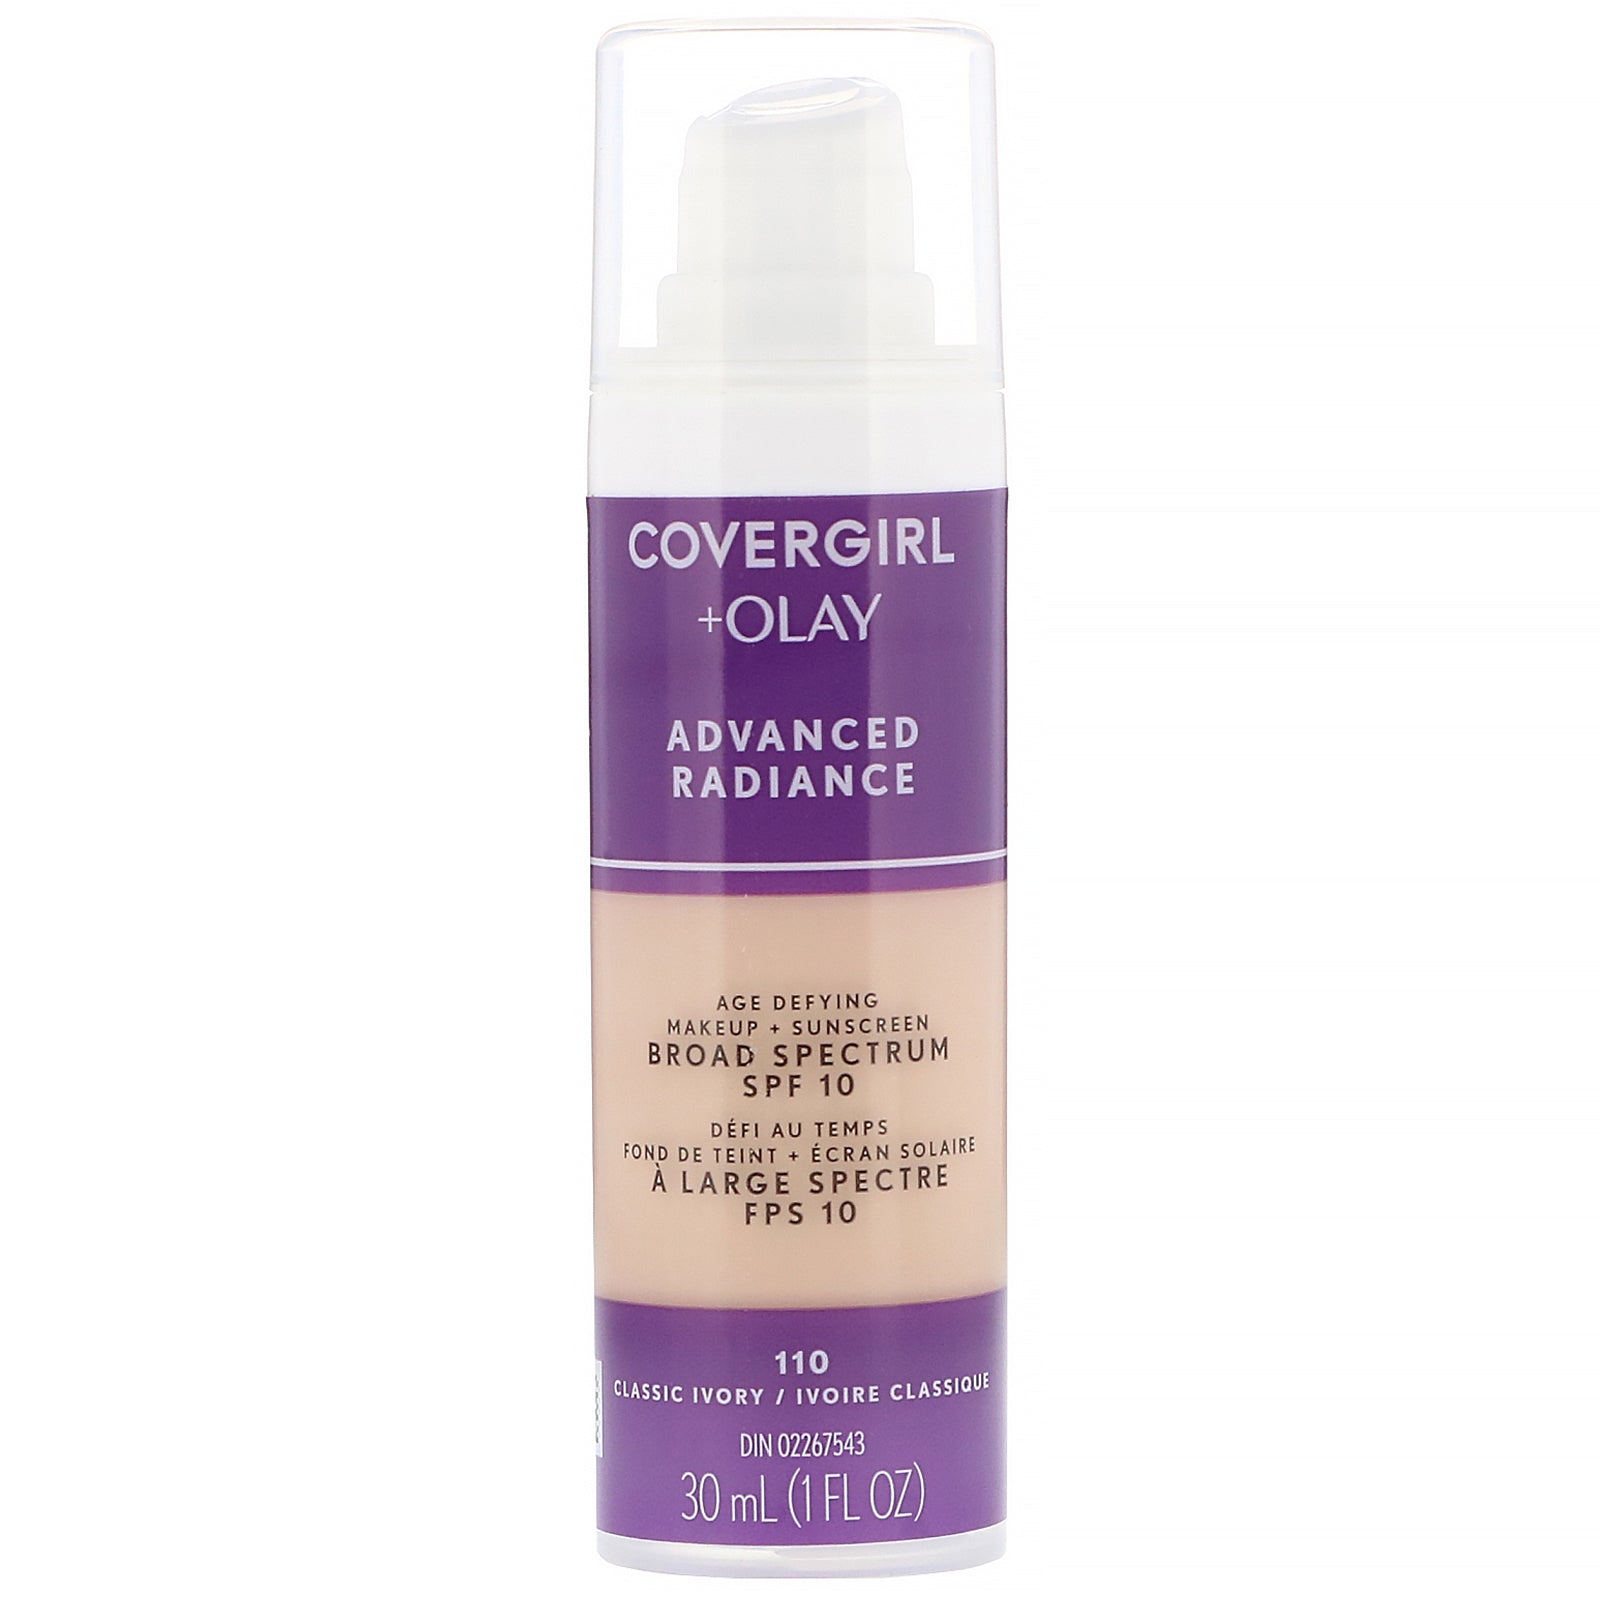 Covergirl, Olay Advanced Radiance, Age-Defying Makeup, SPF 10, 110 Classic Ivory, 1 fl oz (30 ml)